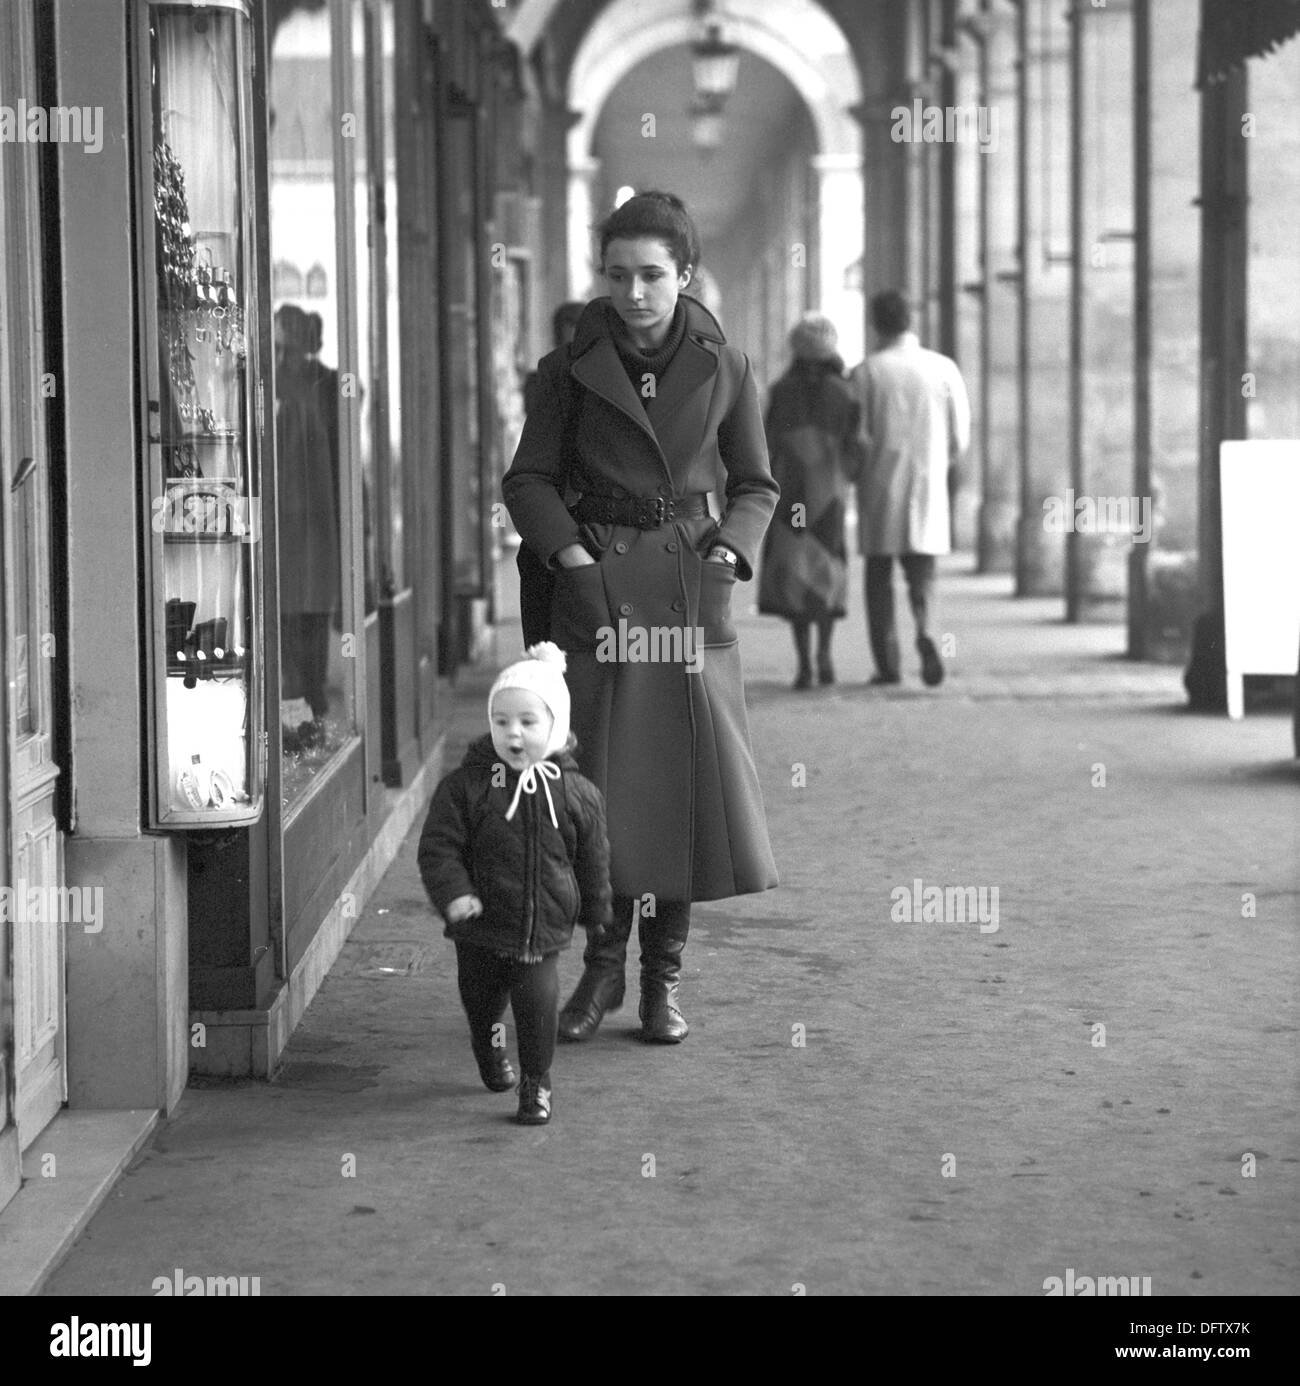 A mother is pictured with her child take a stroll through a shopping street in Paris, France, in November 1970. Photo: Wilfried Glienke Stock Photo